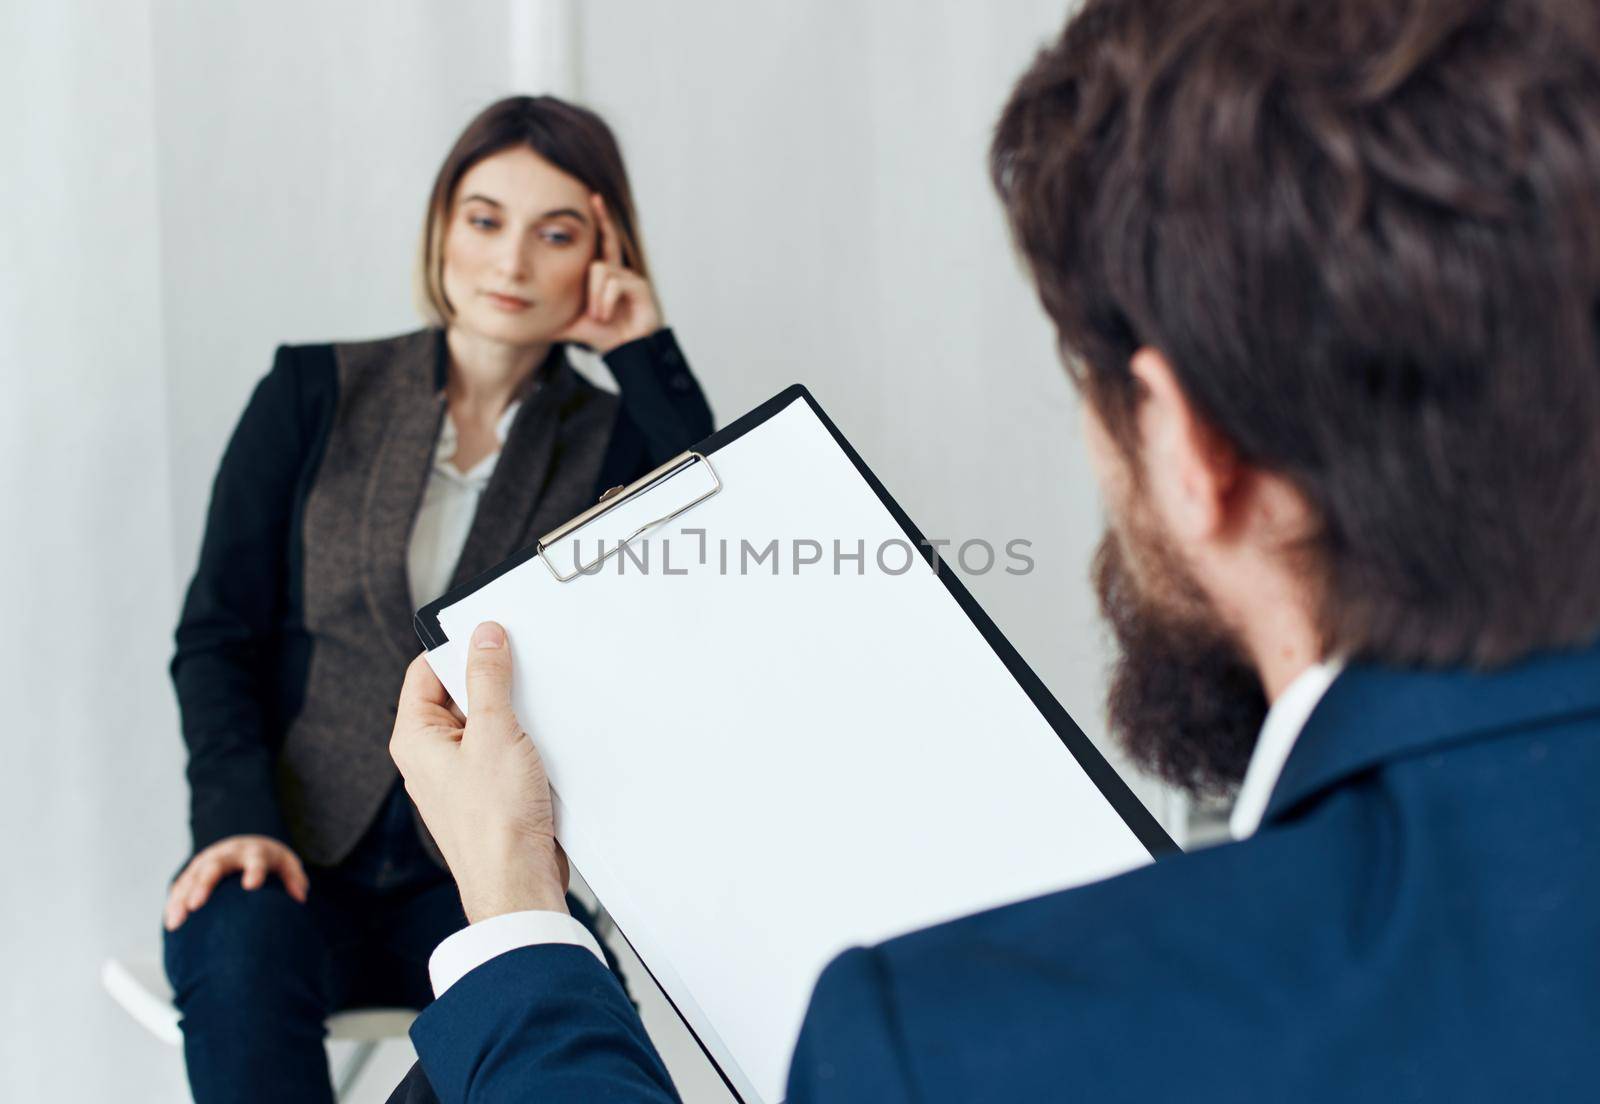 Woman for job interview and man with documents in the foreground. High quality photo